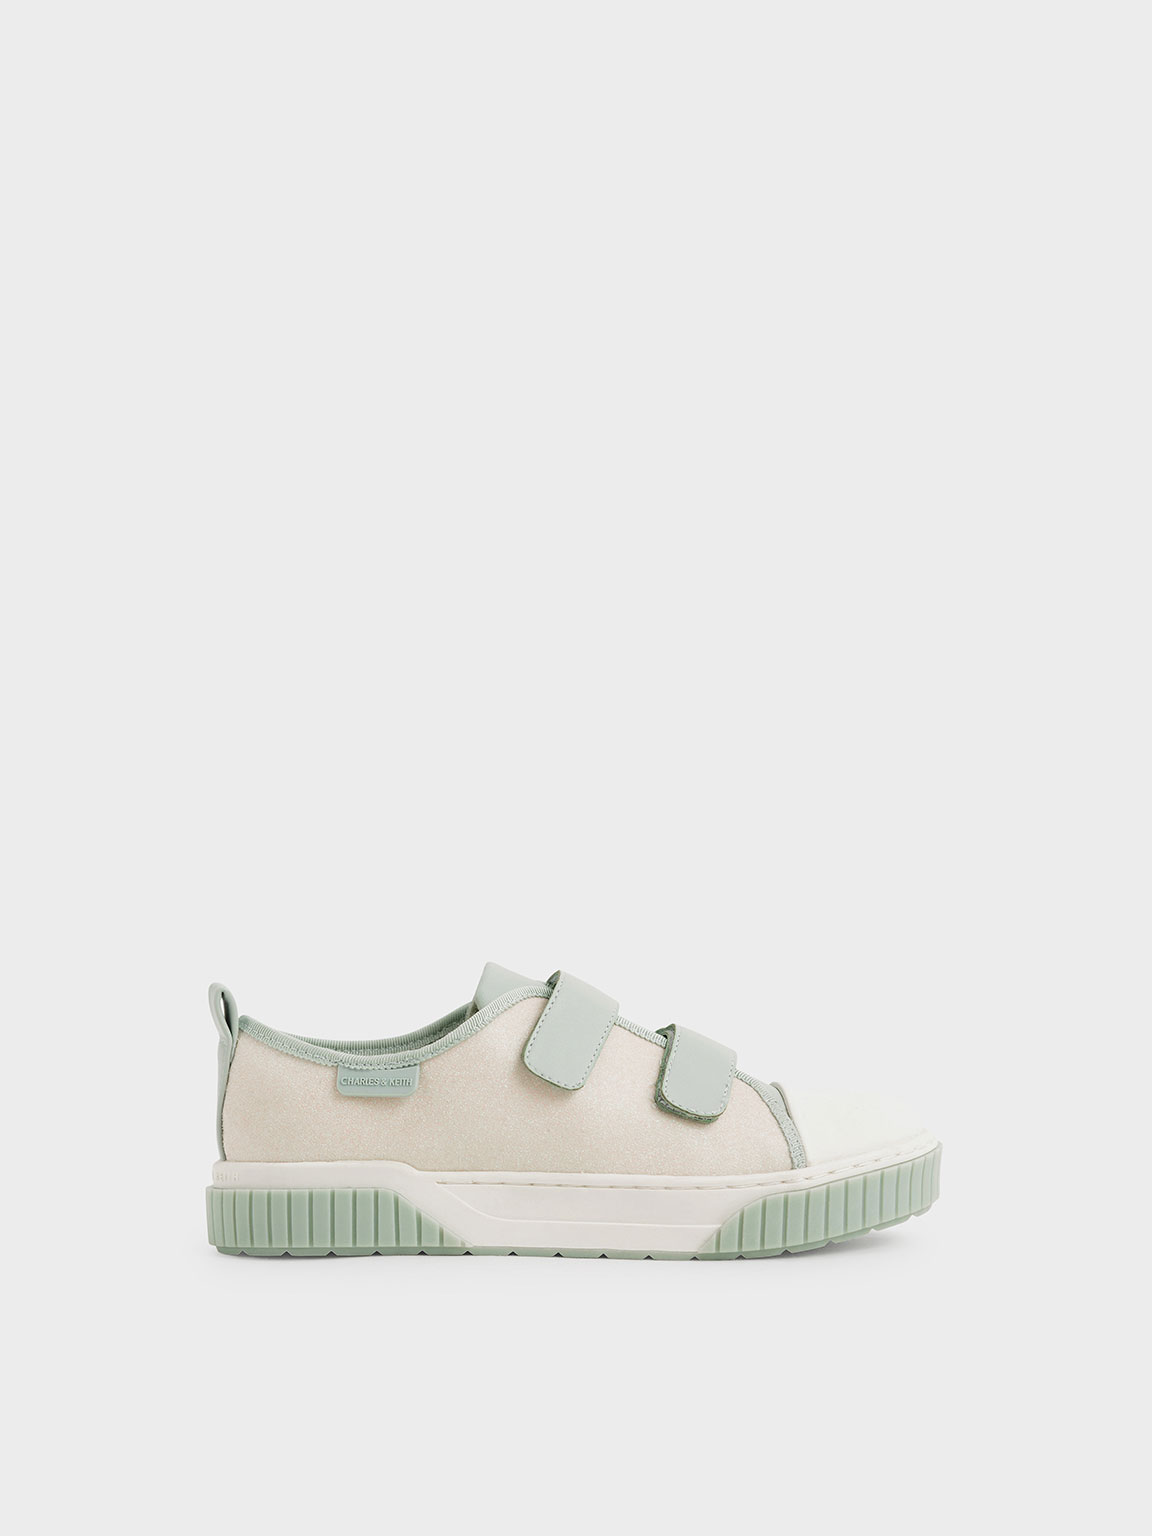 Charles & Keith - Girls' Velcro Strap Glitter Sneakers, Mint Green, US 5.5